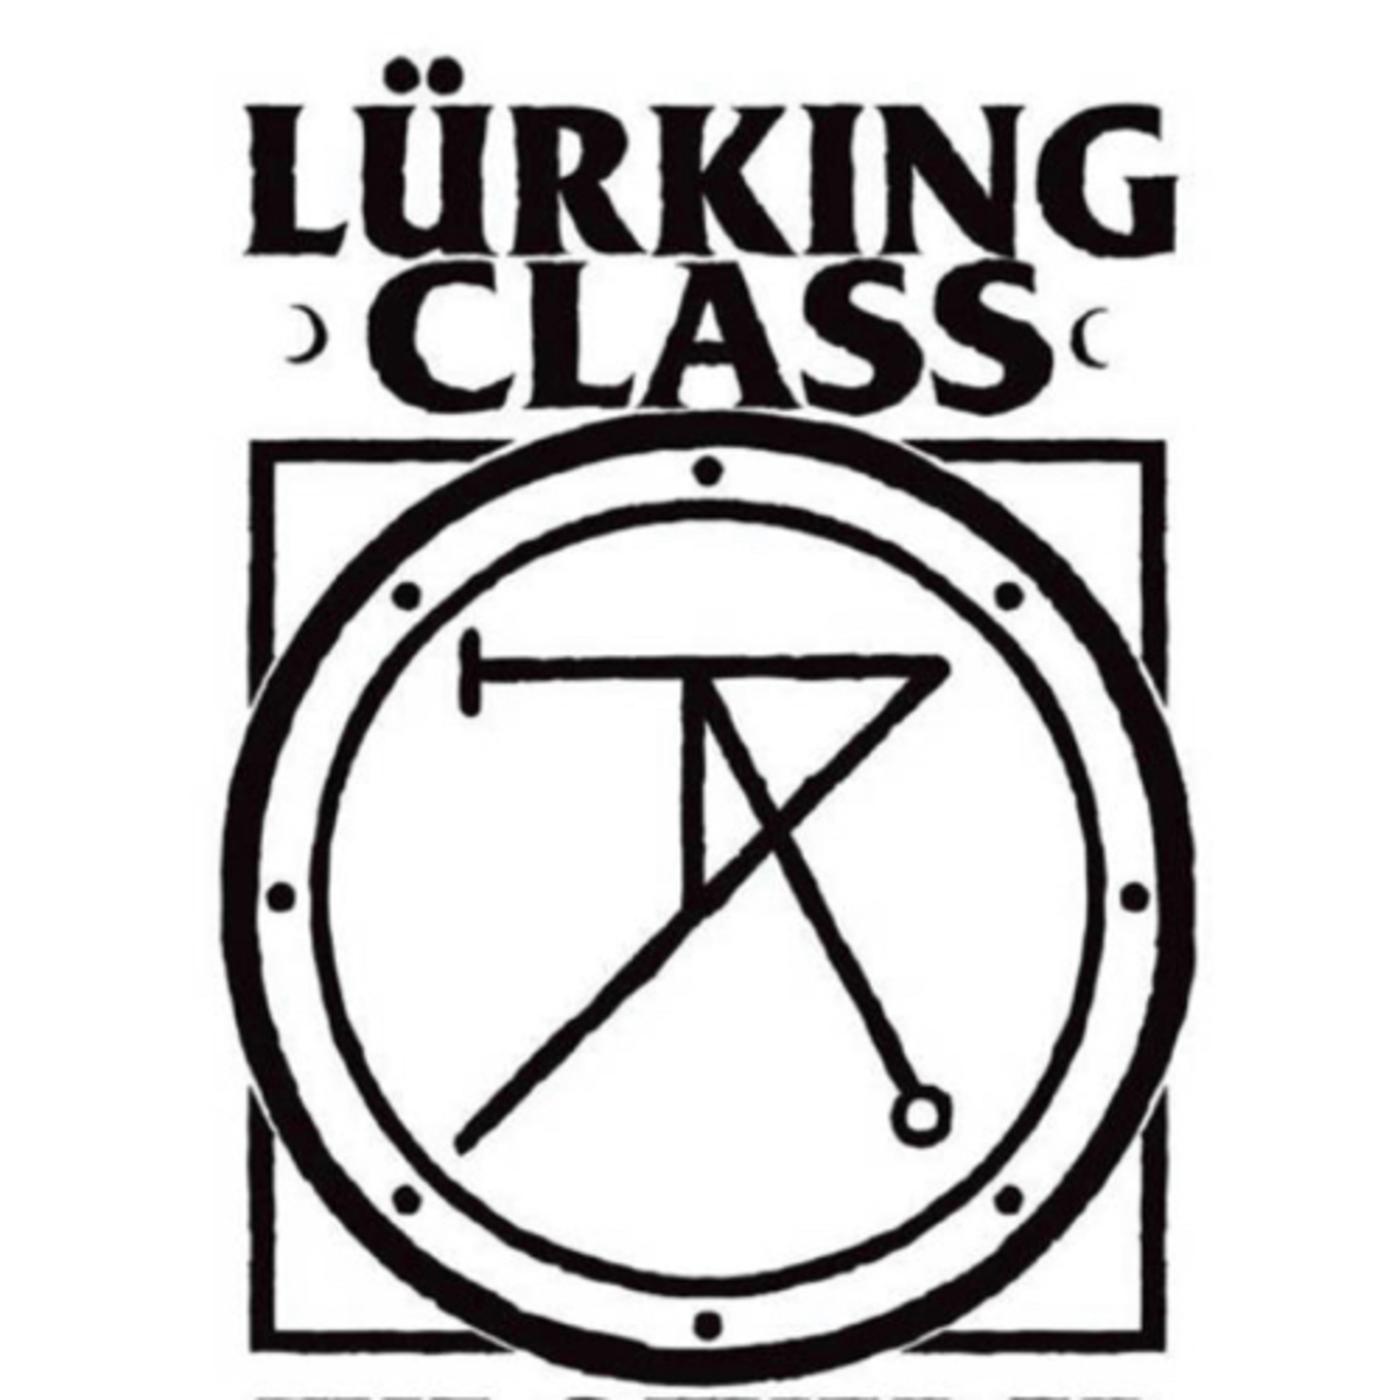 45. Amsterdam - The Lürking Class Podcast | Listen Notes